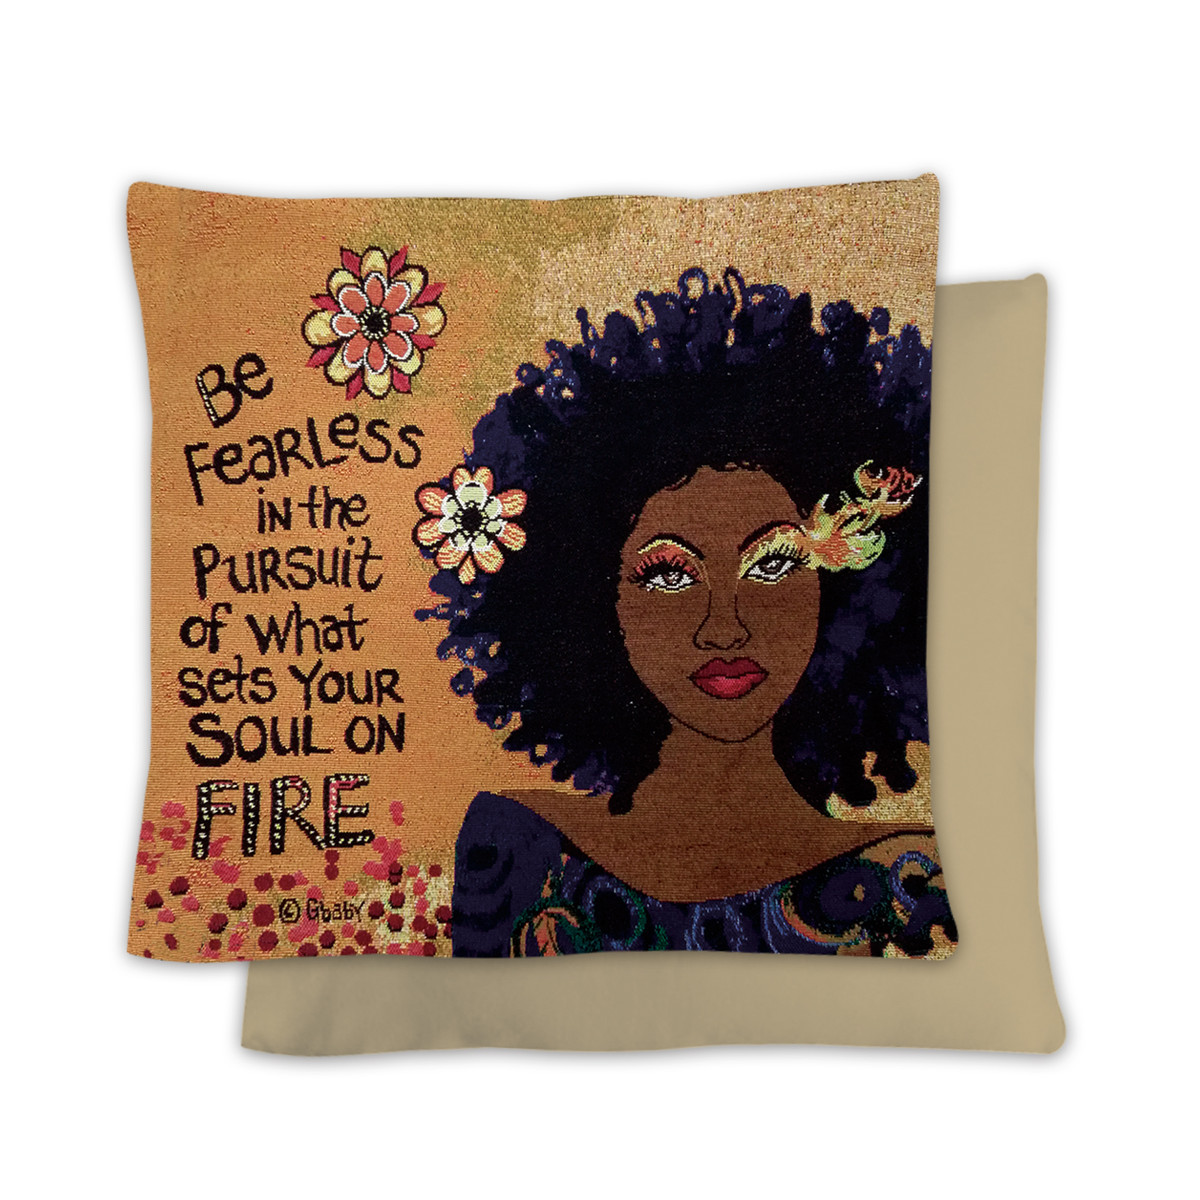 Shades of Color Pillow Cover - "Soul On Fire" By Sylvia "G Baby" Phillips